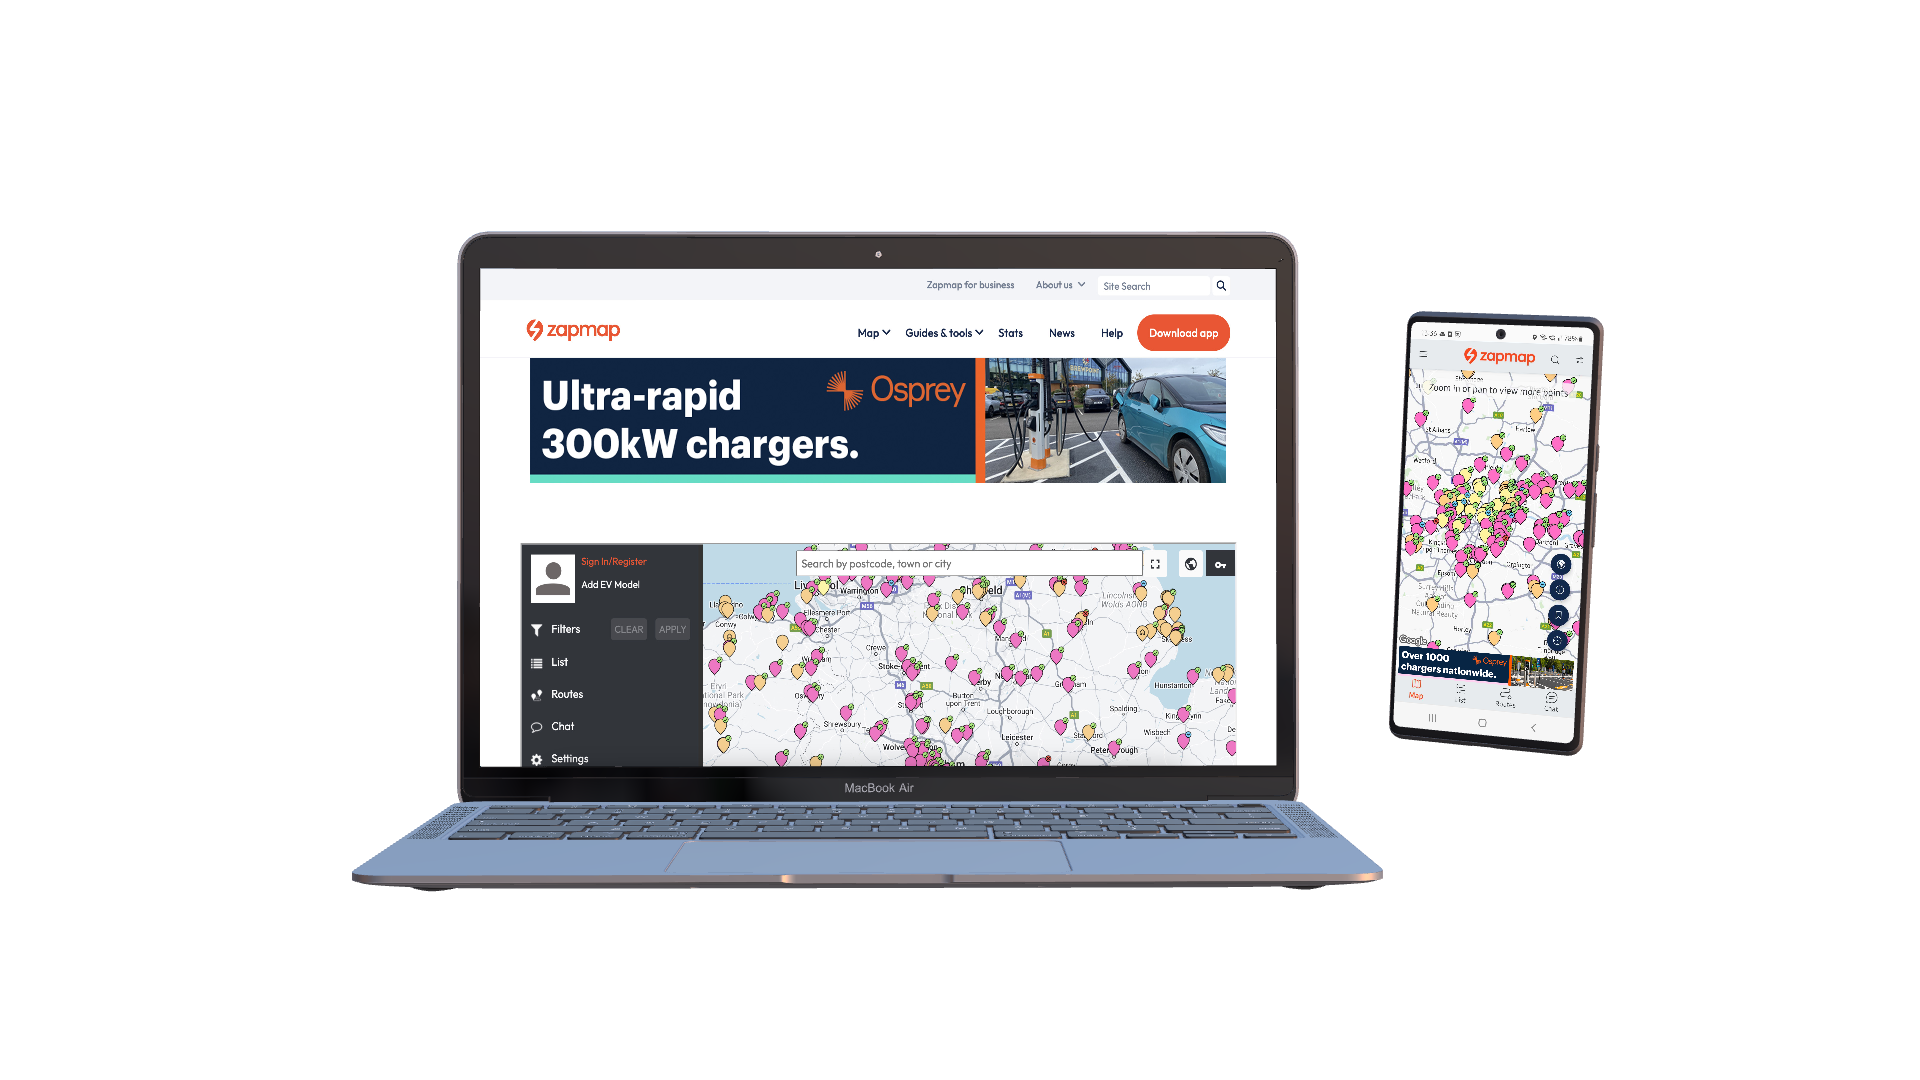 Osprey ads on the Webmap and Mobile App